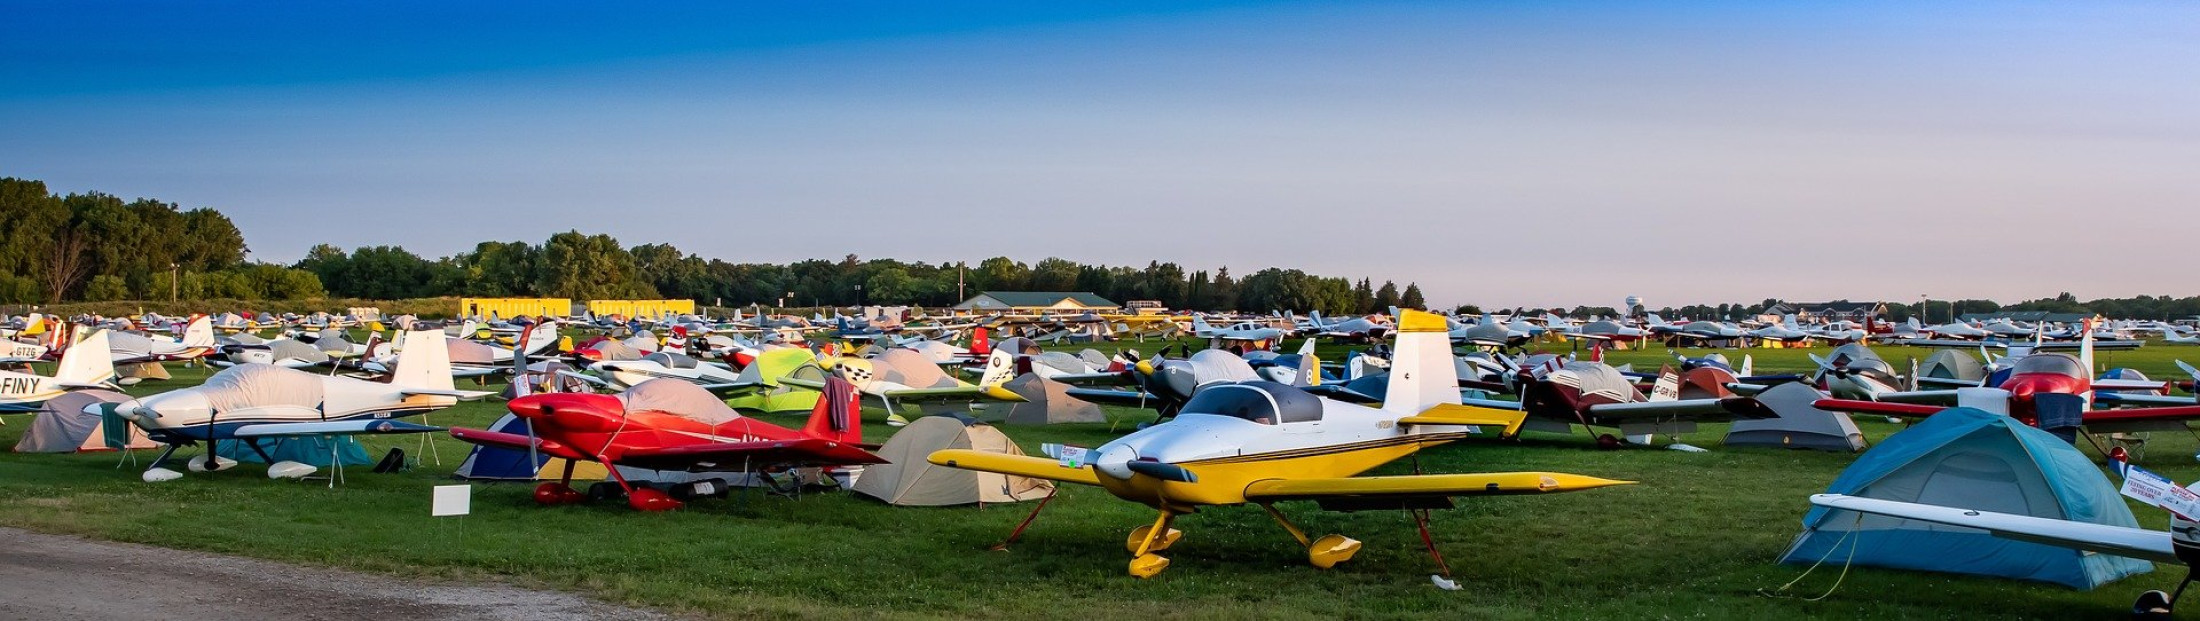 contact-airplanes-in-fields-with-tents.jpg